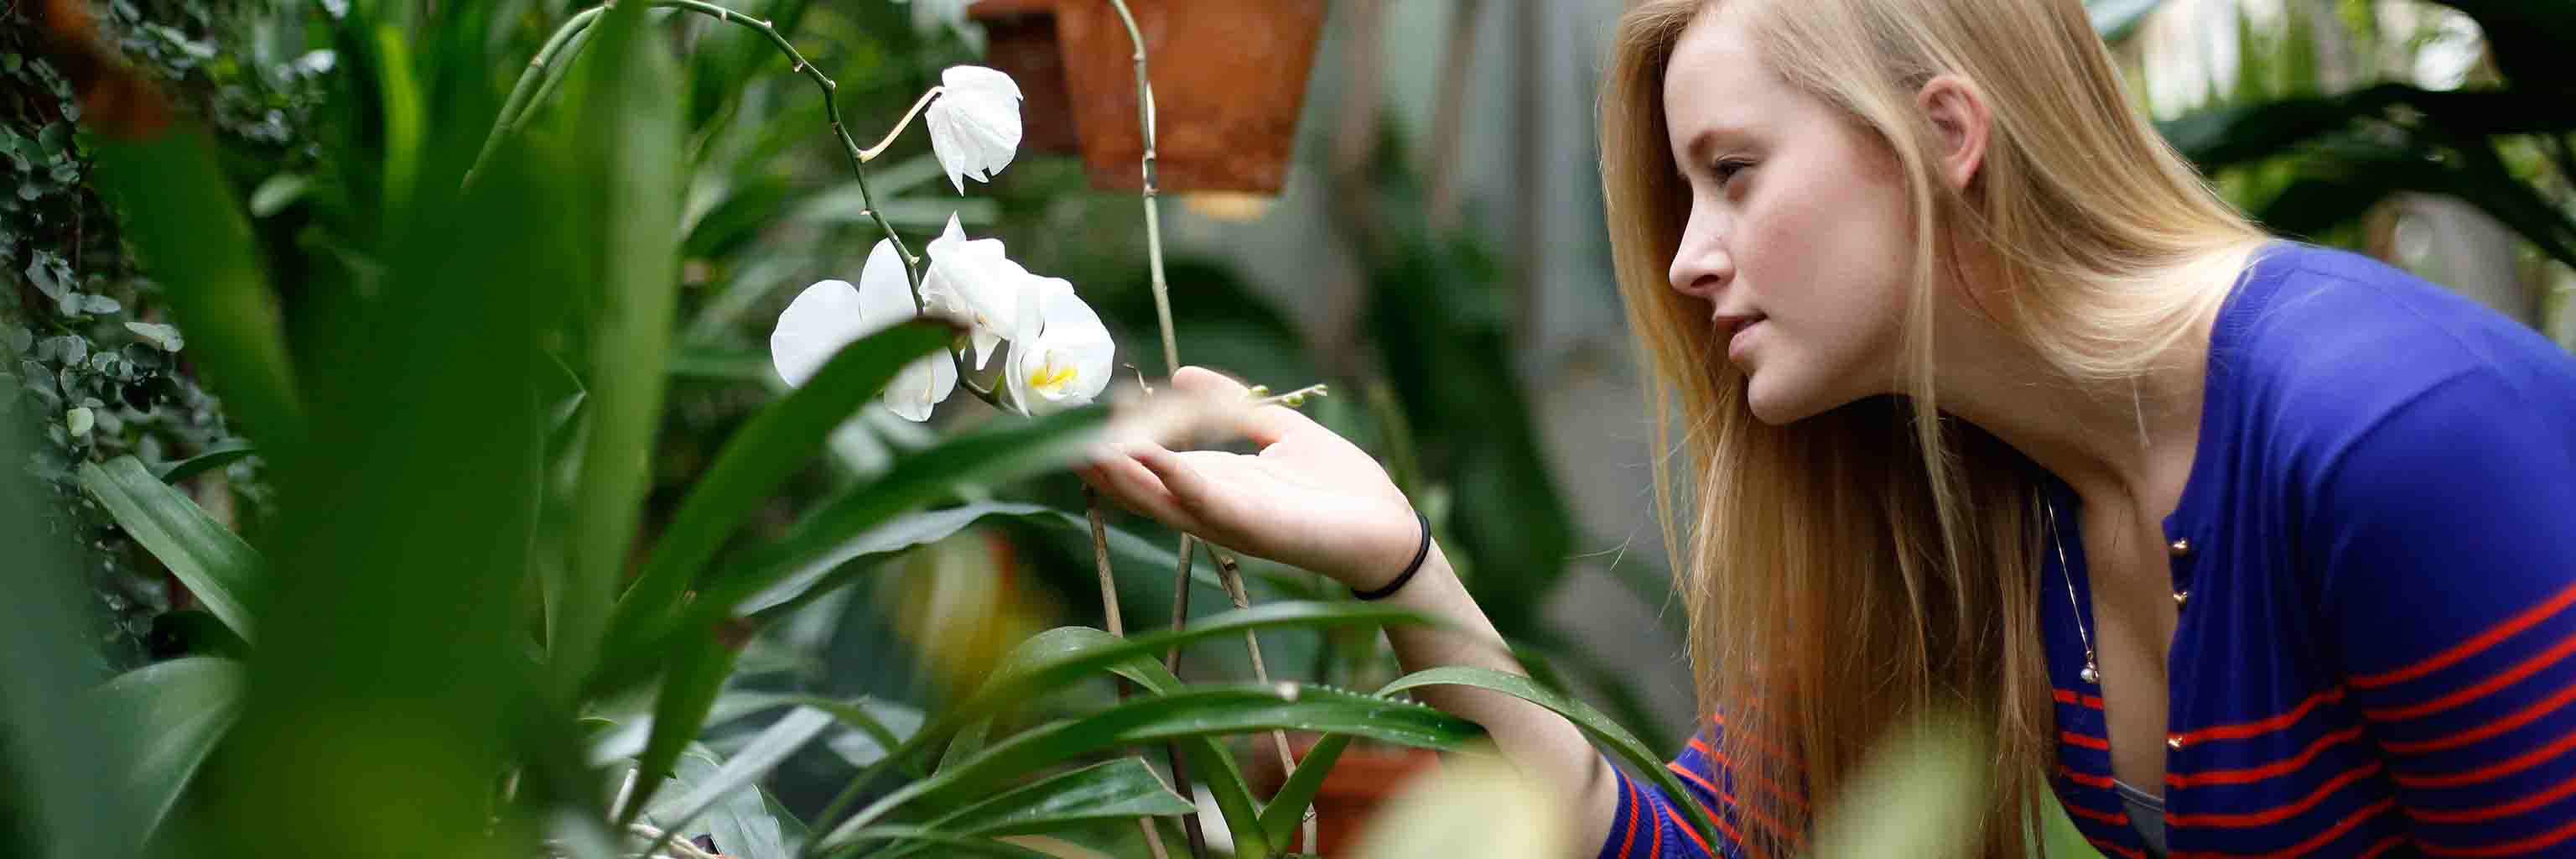 A young woman examines a flower.